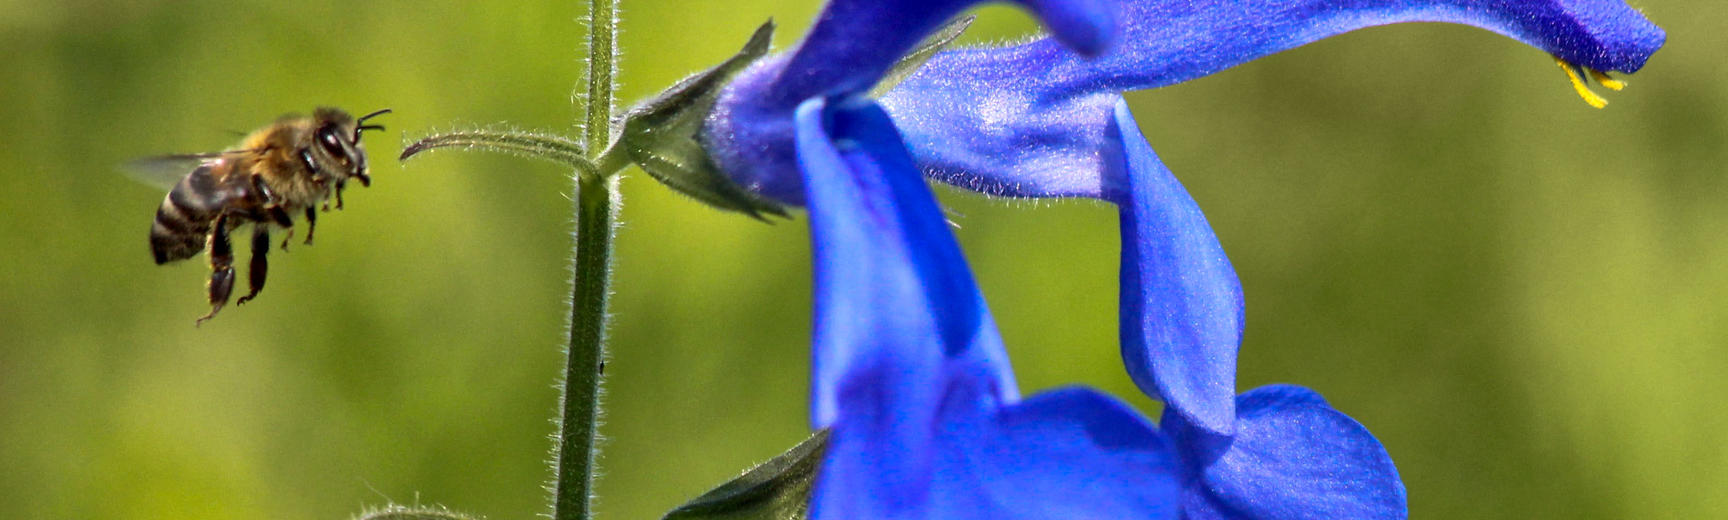 Close up photo of a bee flying towards a blue flower